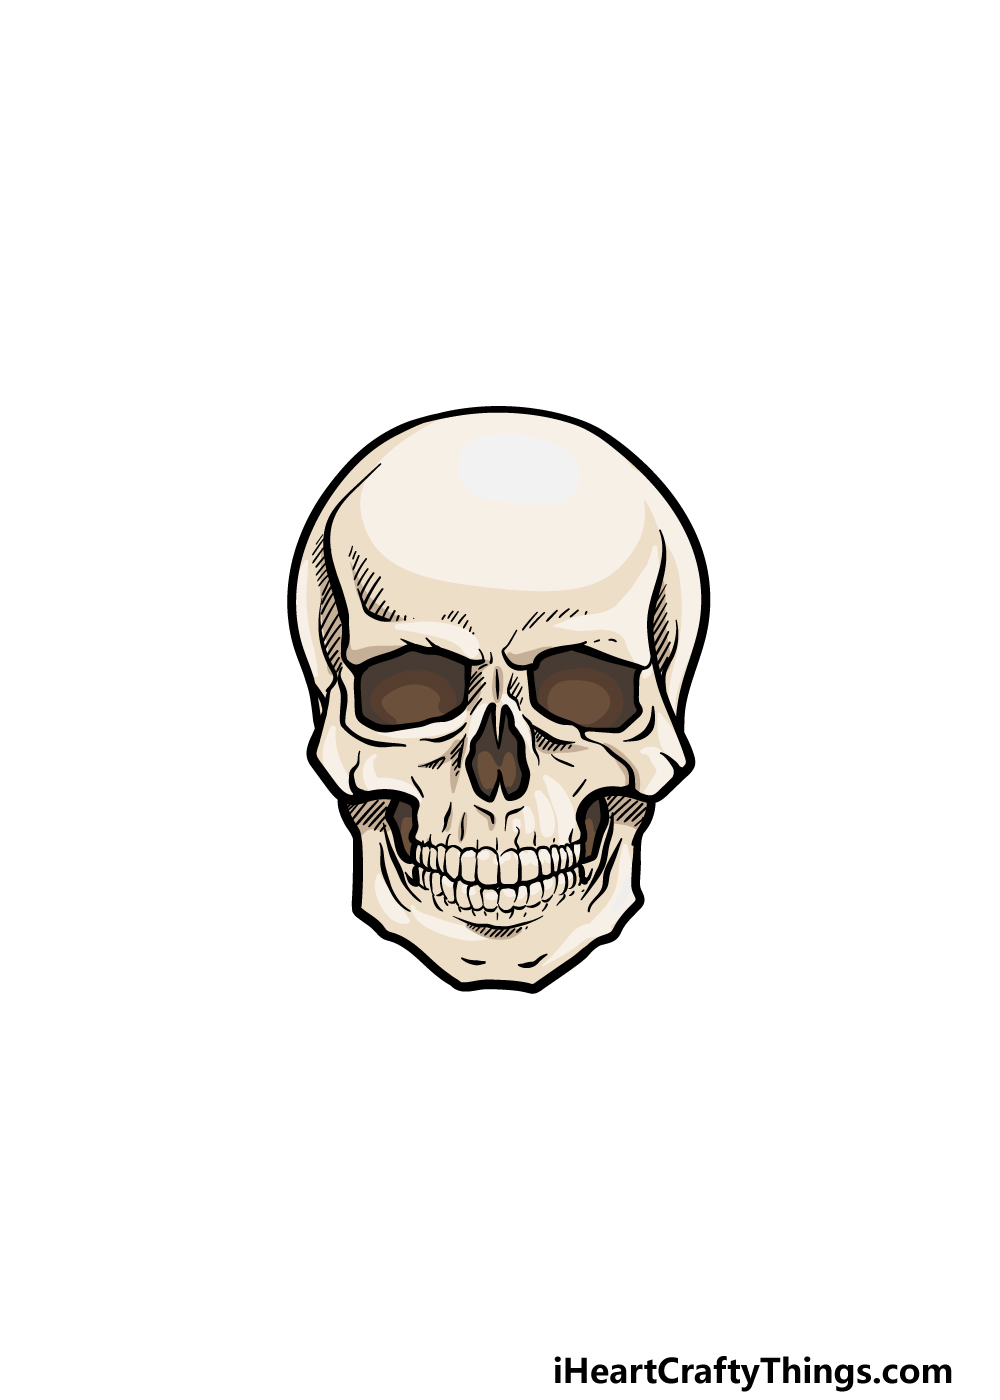 How to Draw A Skeleton Head – A Step by Step Guide